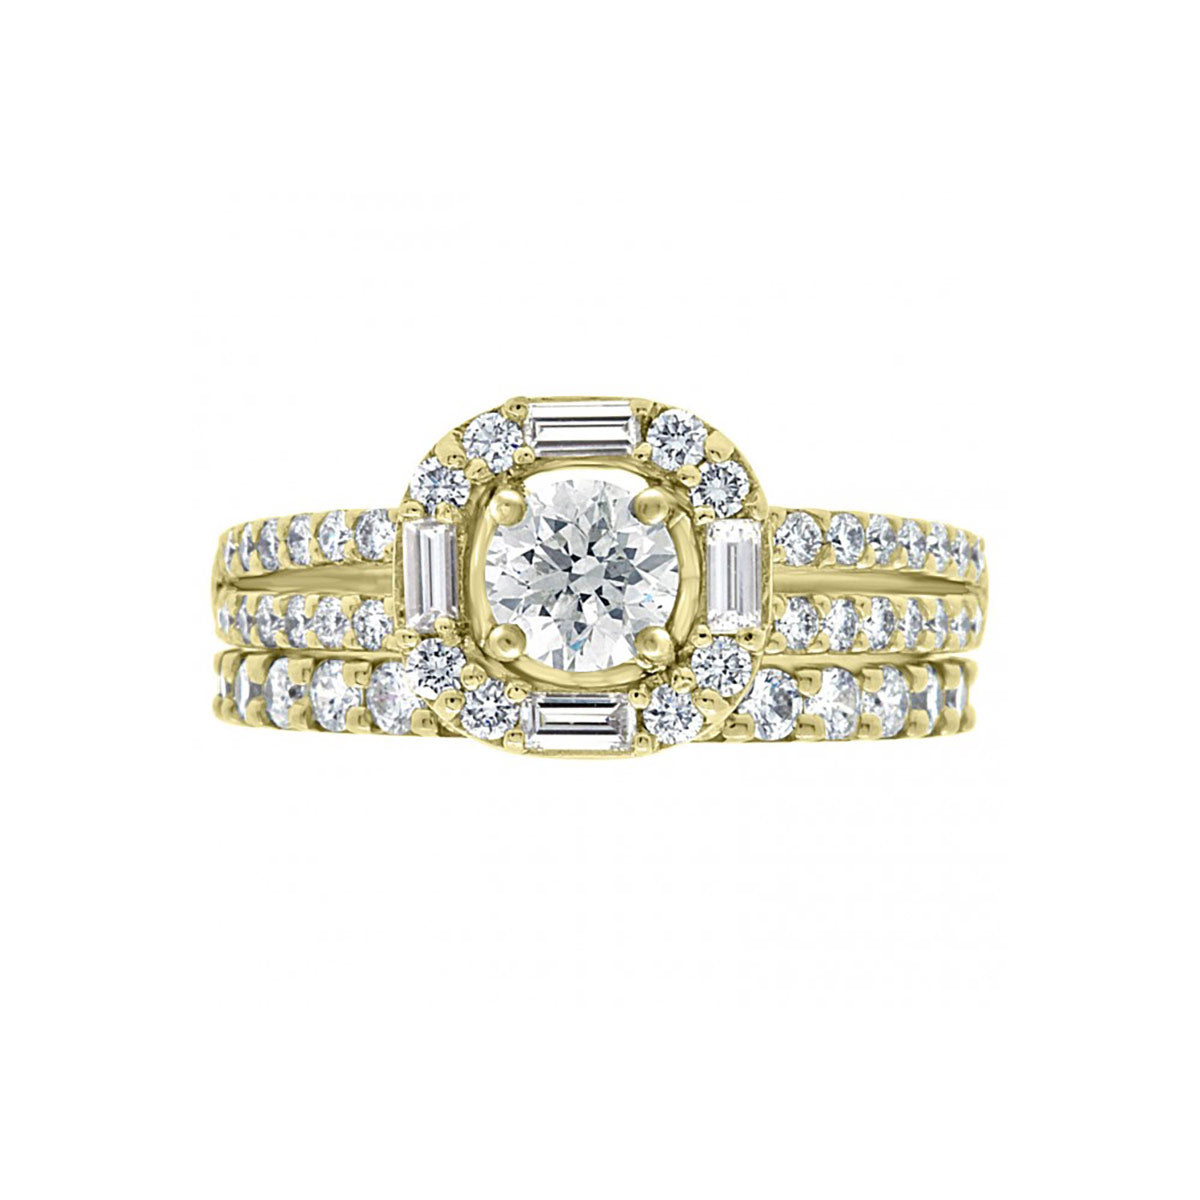 Baguette and Round Diamond Engagement Ring in yellow gold with a diamond wedding band